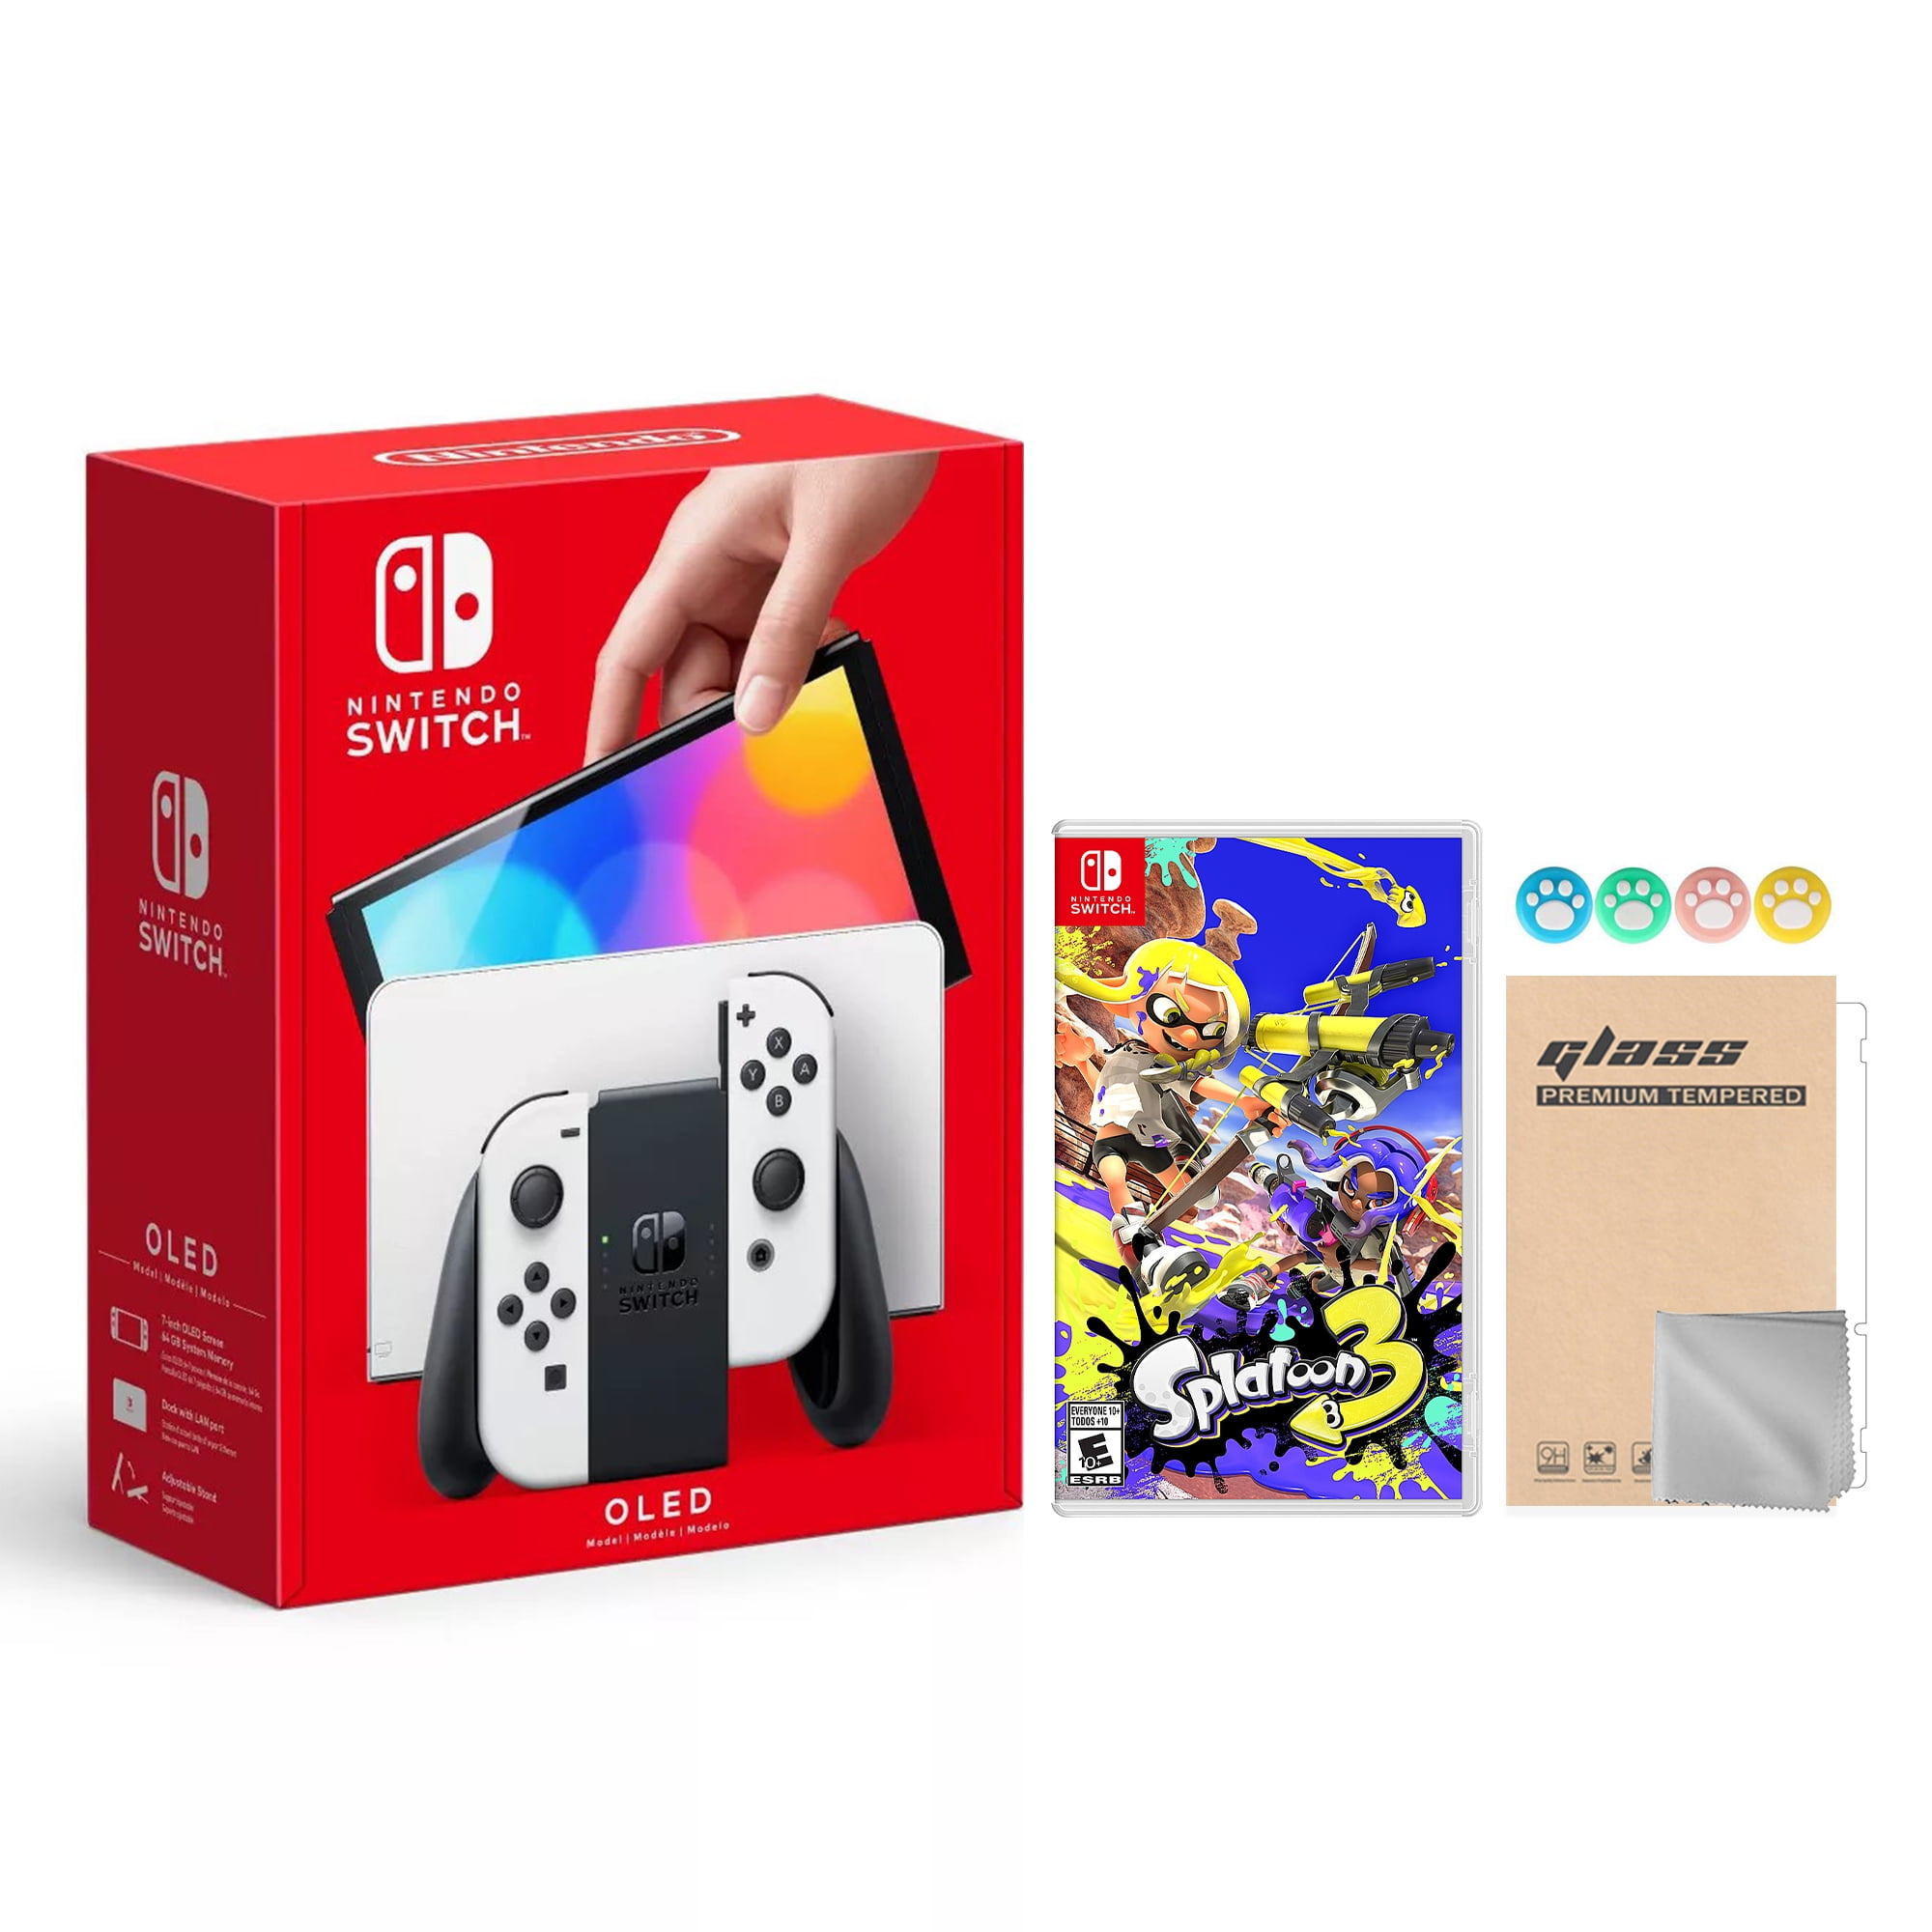 2022 New Nintendo Switch OLED Model White Joy Con 64GB Console with  Splatoon 3 Game, Improved HD Screen & LAN-Port Dock, Mytrix Joystick Caps &  Screen 